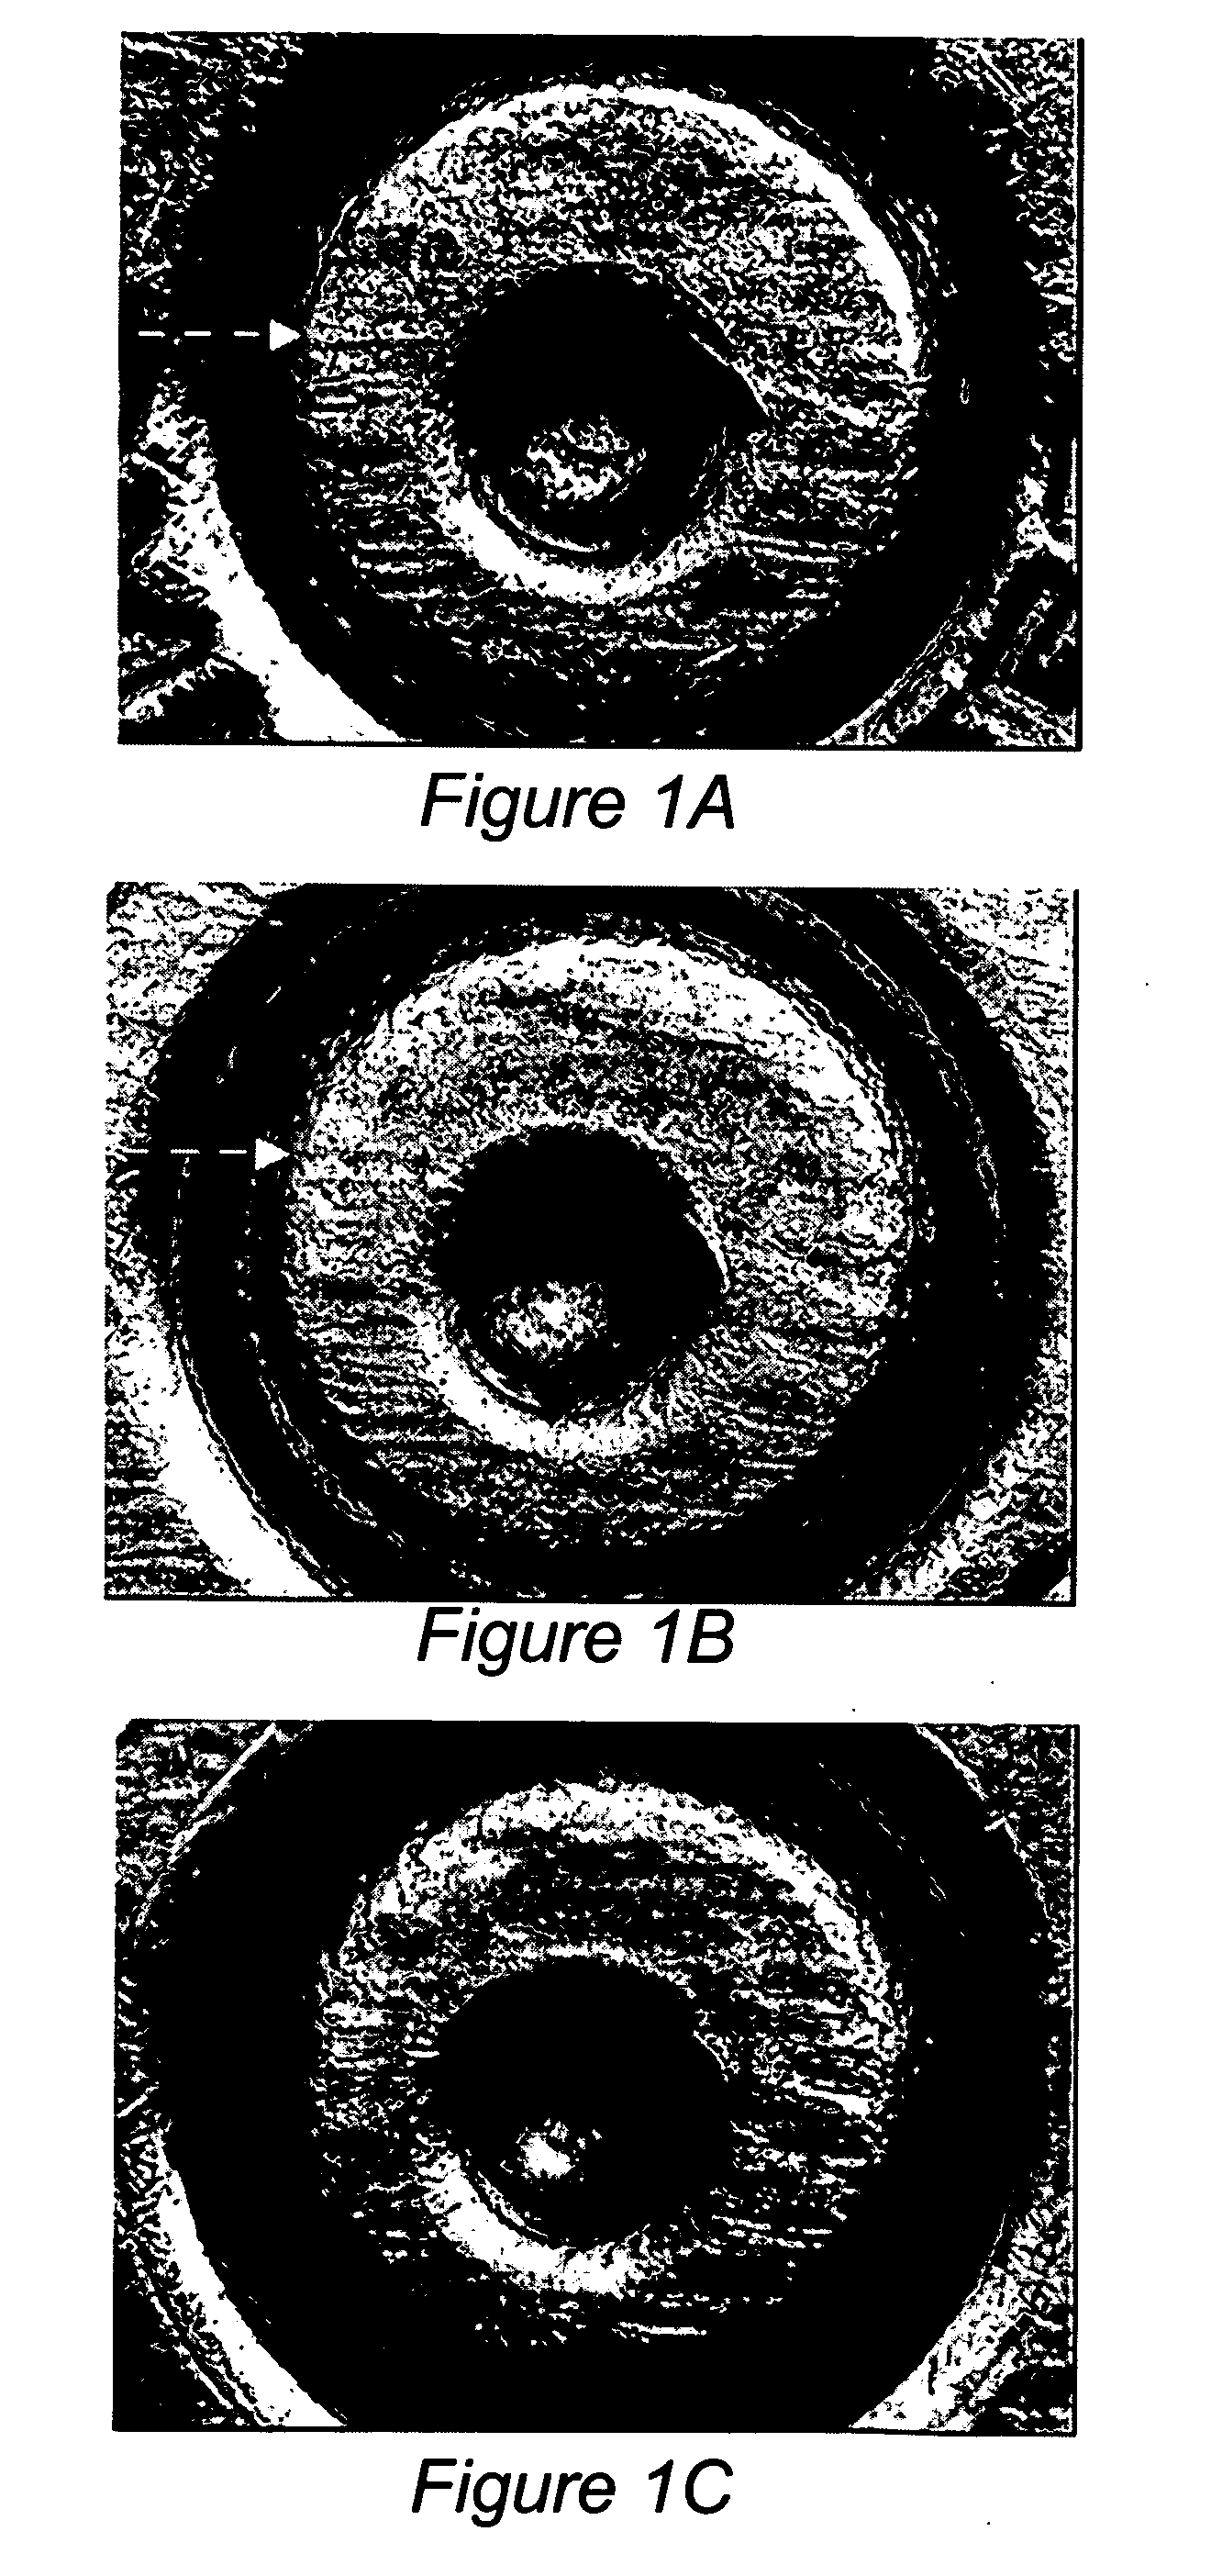 Method and apparatus for alignment, comparison & identification of characteristic tool marks, including ballistic signatures